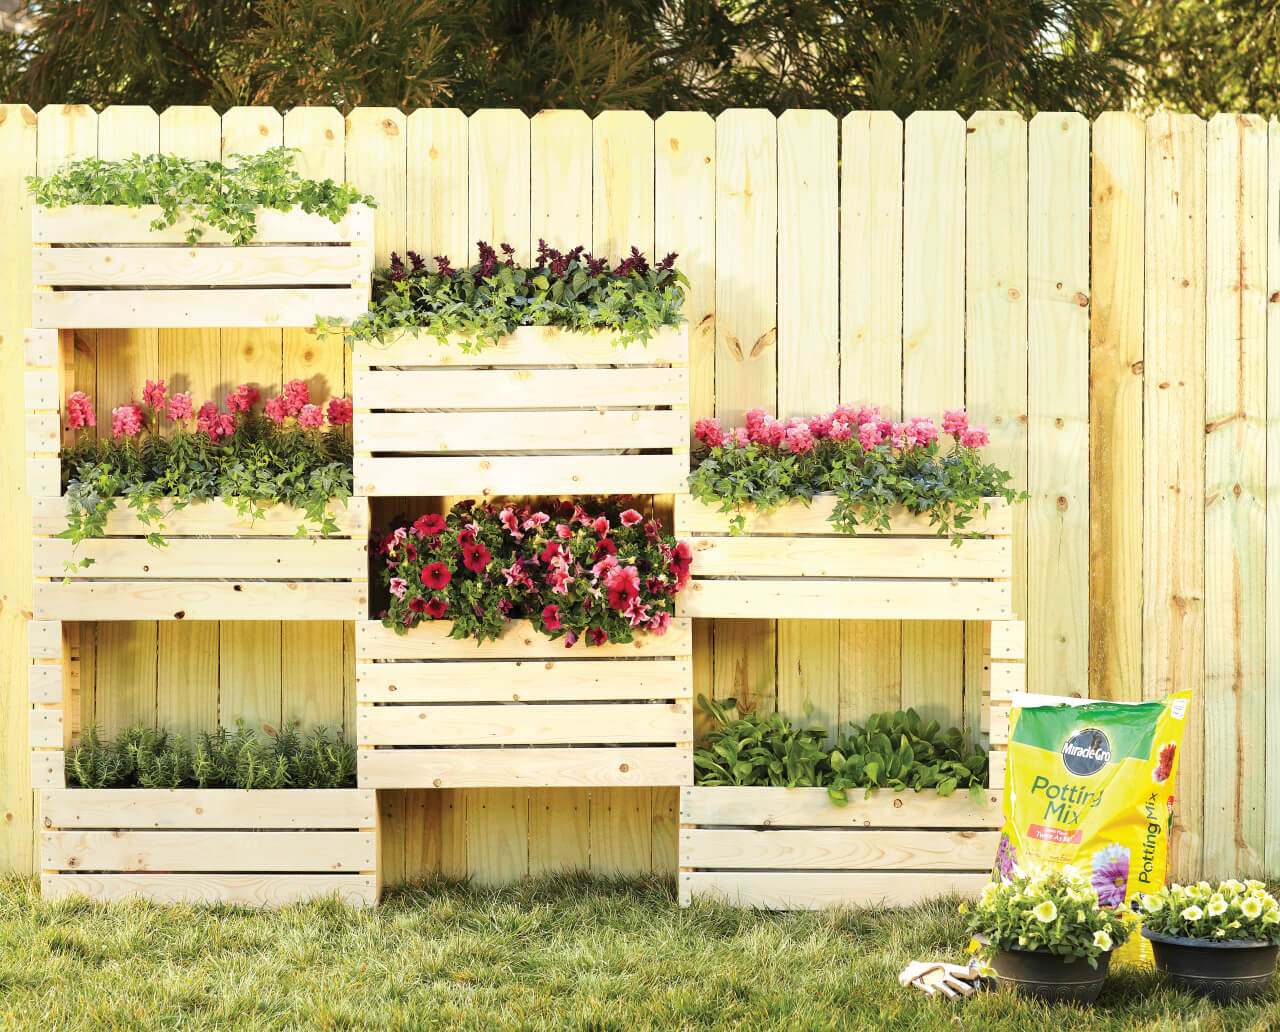 A Creative Use for Ordinary Wooden Crates